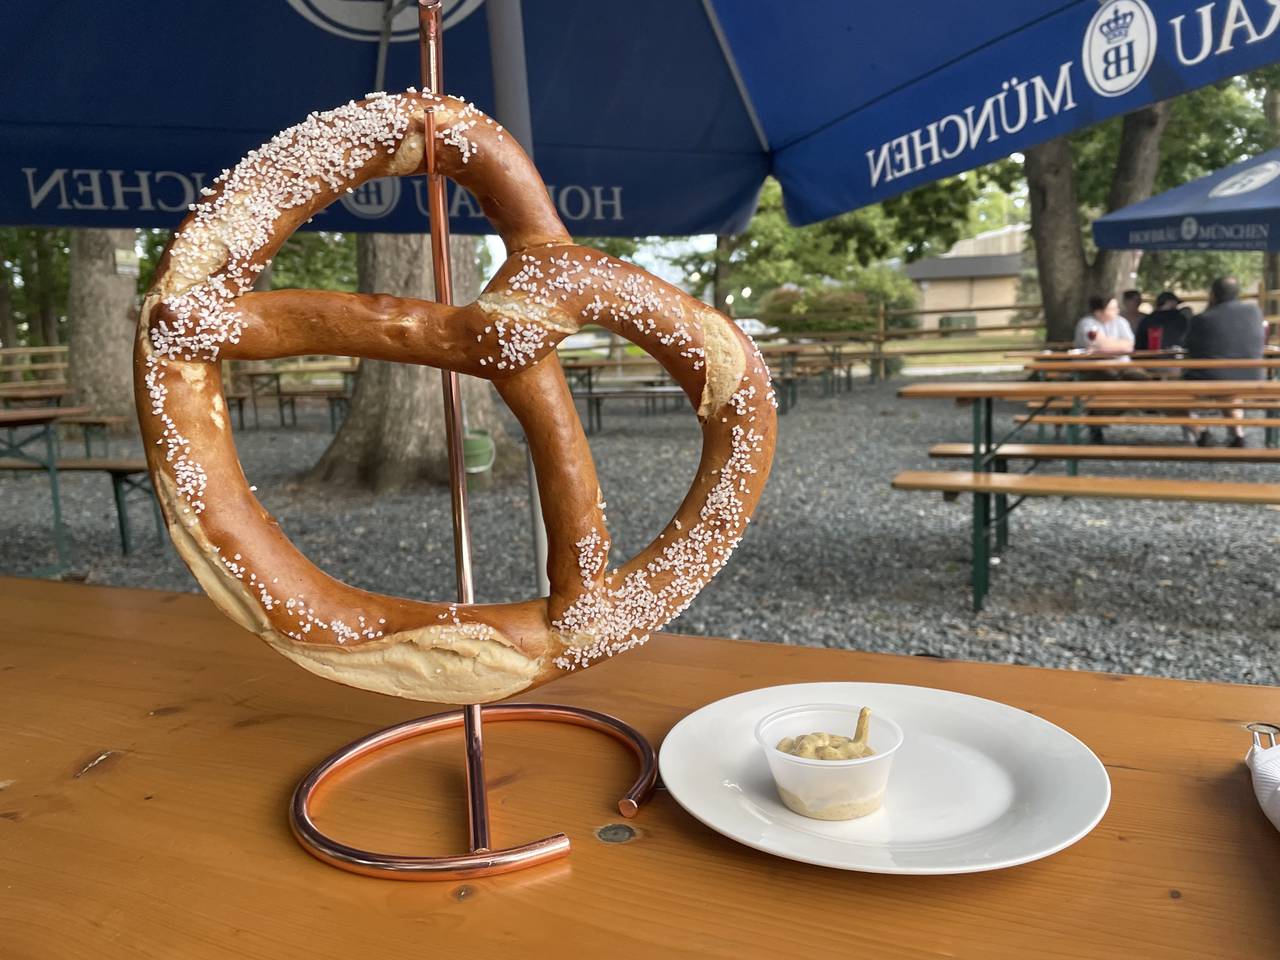 Jumbo pretzels at Prost are just one of the many Bavarian specialties on the menu at this Aberdeen hall.